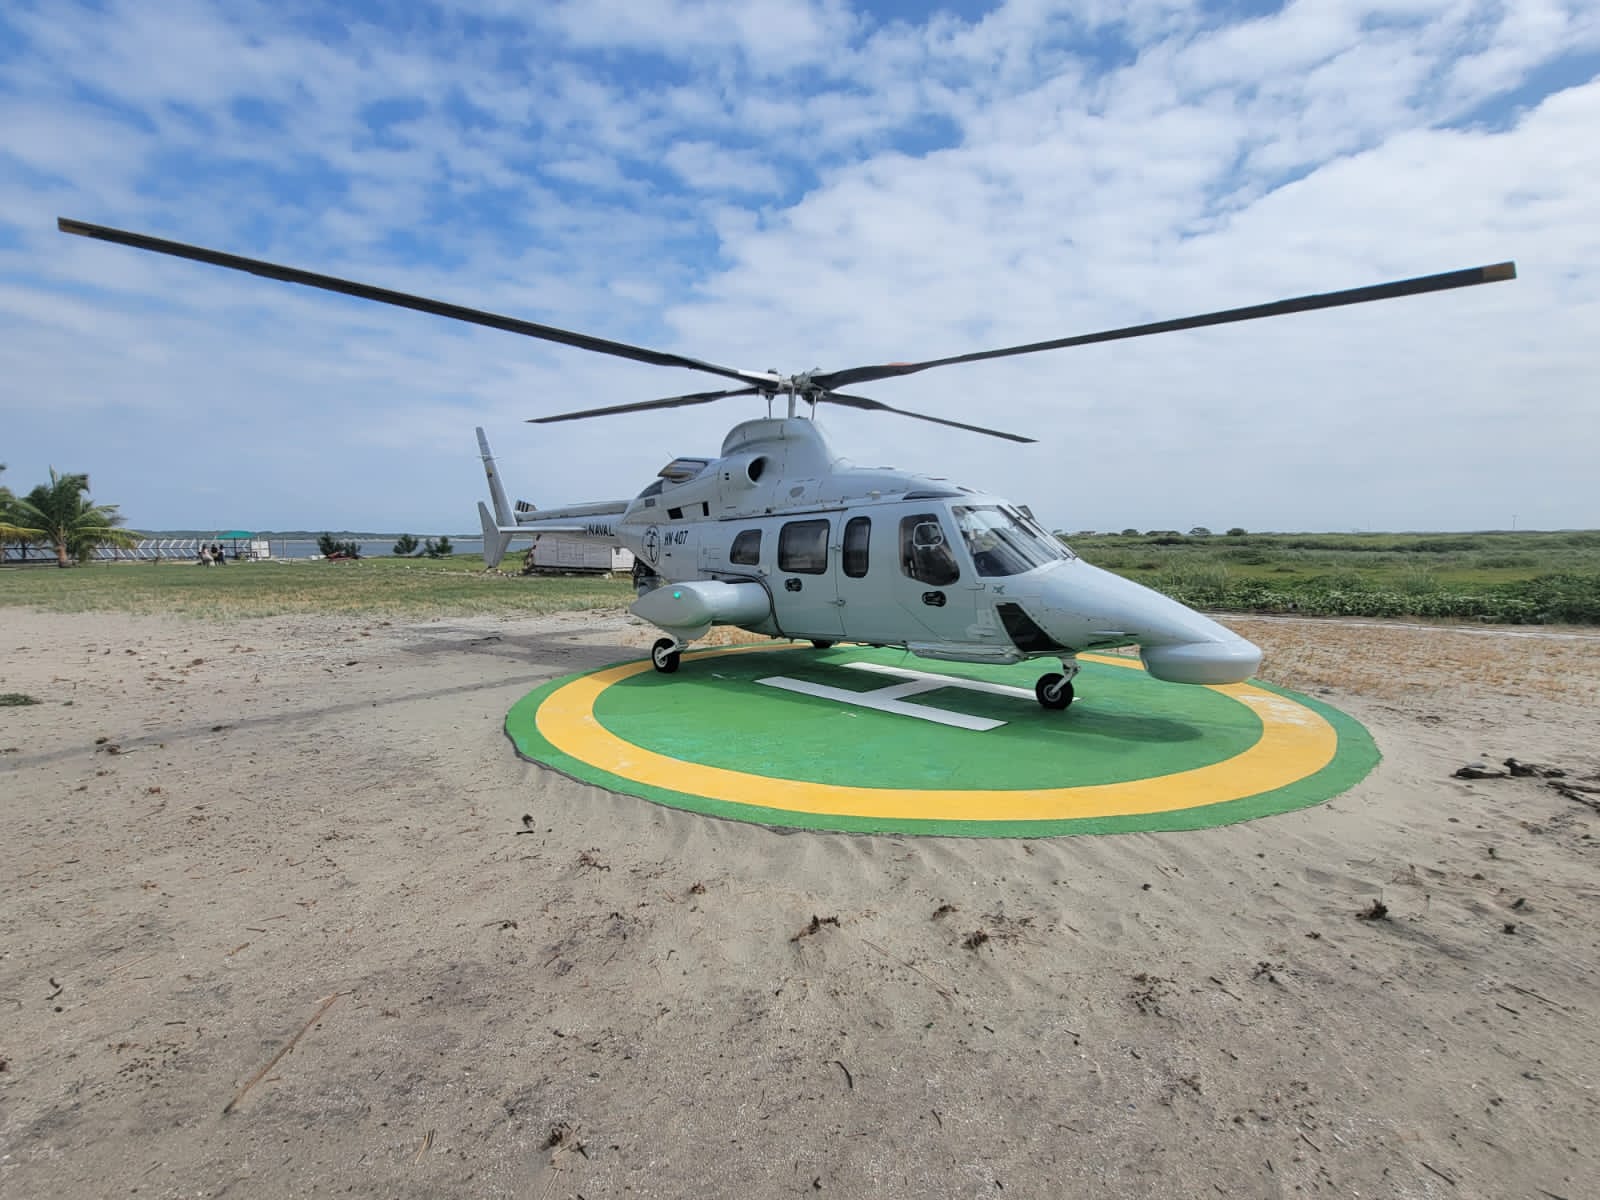 The Ecuadorian Navy's Bell 430 aircraft with the ID HN-407 is seen on a helipad in the middle of a sandy area. The helicopter is painted white, with "HN-407" written on the right side of its body in black. On the back, green grass can be seen stretching all the way to the horizon. A body of water peeks a little bit farther. The sky is blue with lots of thin white clouds.